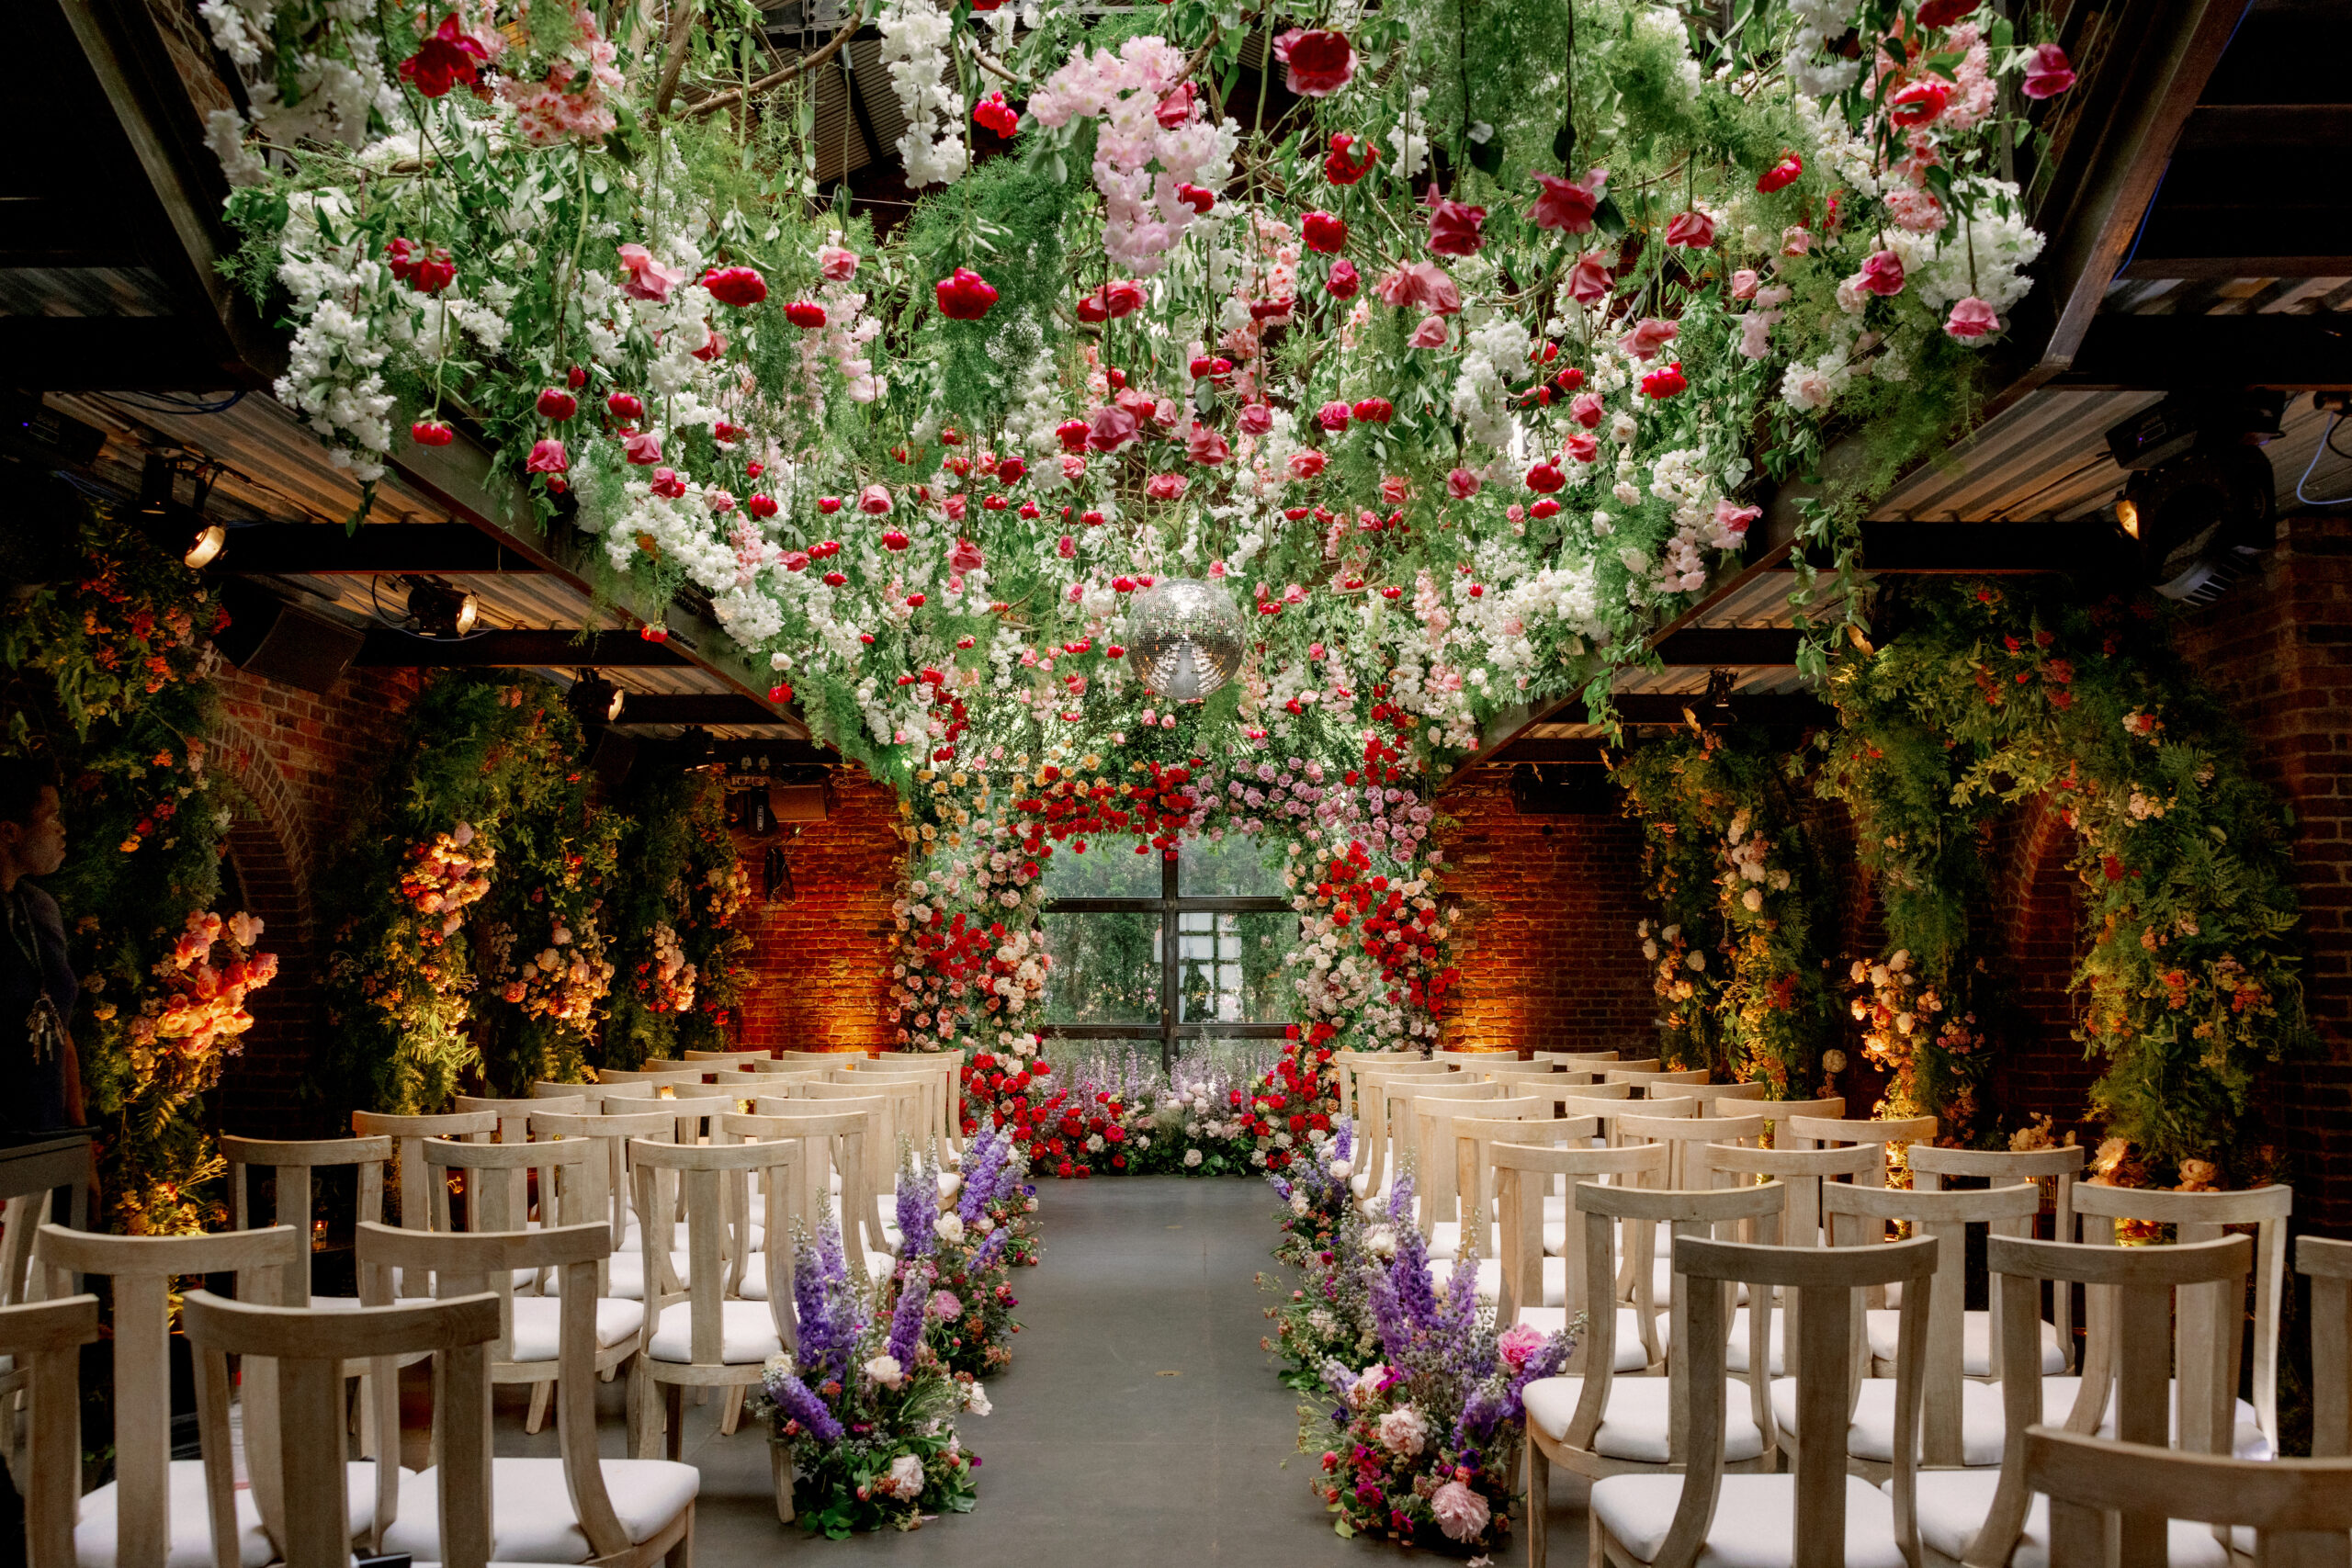 Stunning wedding ceremony set up at The Foundry. Luxurious wedding venues Image by Jenny Fu Studio